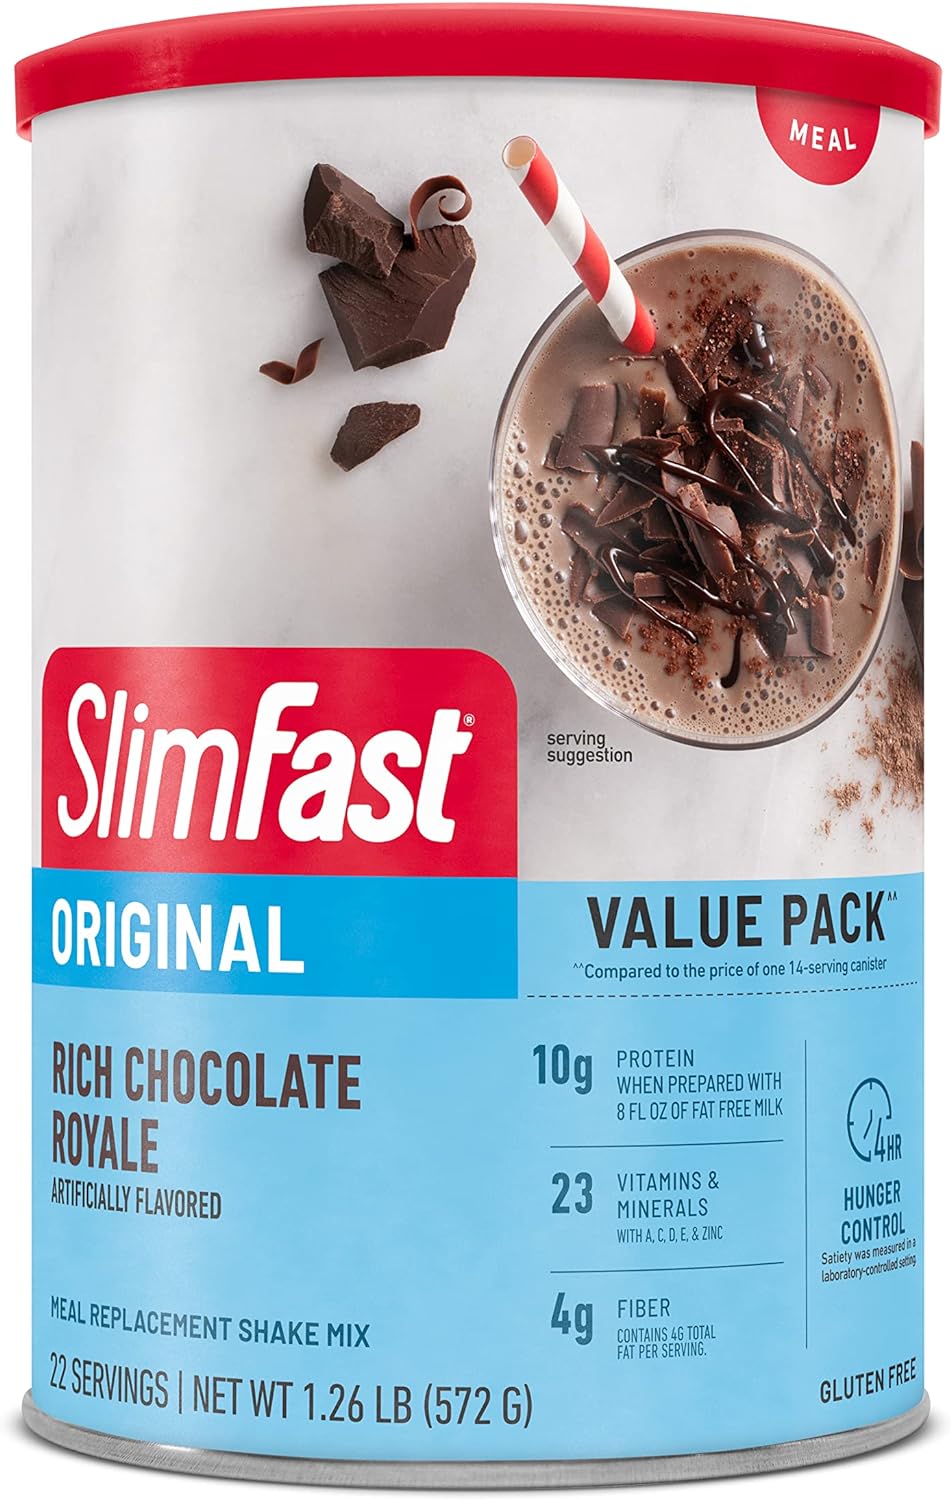 SlimFast Meal Replacement Powder, Original Rich Chocolate Royale, 10g 1.26 Pounds